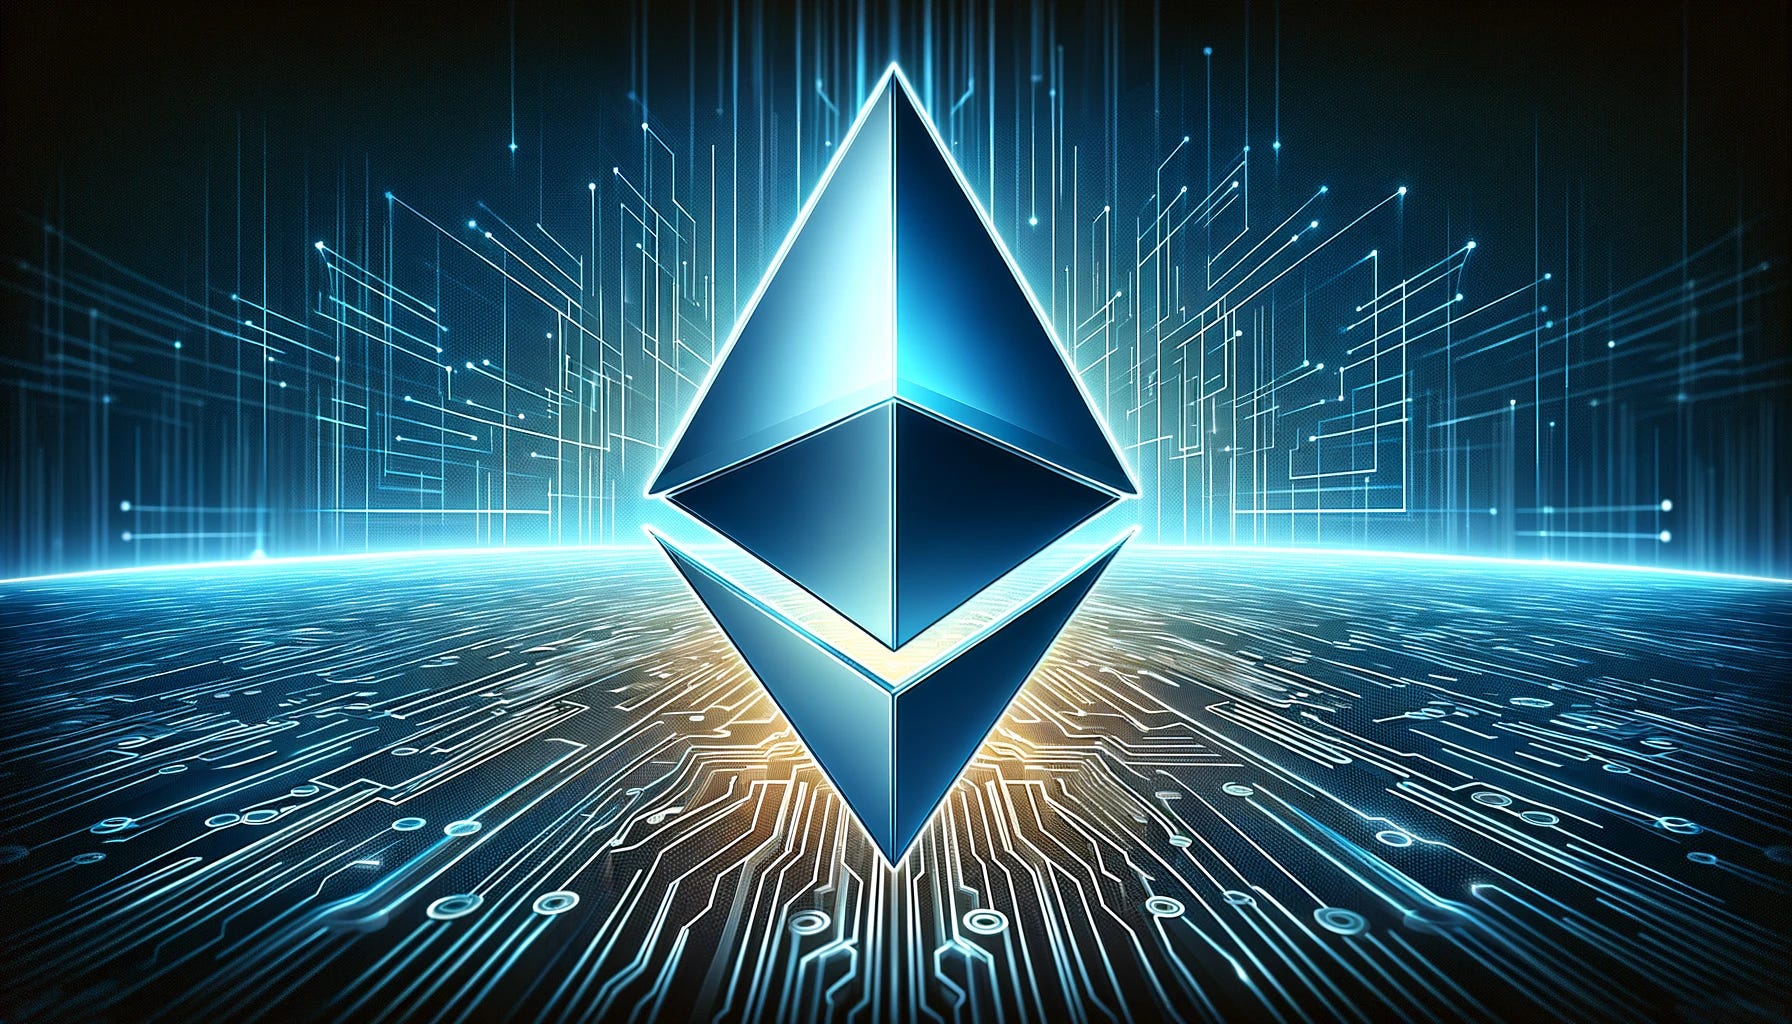 Create a landscape format artistic representation of the Ethereum cryptocurrency. The image should prominently feature the Ethereum logo, which is a stylized diamond shape made of two intersecting lines, creating an optical illusion of a cube. This logo should be centered and highlighted against a digital, abstract background that evokes a sense of advanced technology and innovation. The color palette should include Ethereum's signature shades of blue, along with black and grey, to convey a futuristic and sophisticated atmosphere. The overall design should capture the essence of Ethereum as a leading, decentralized blockchain technology.